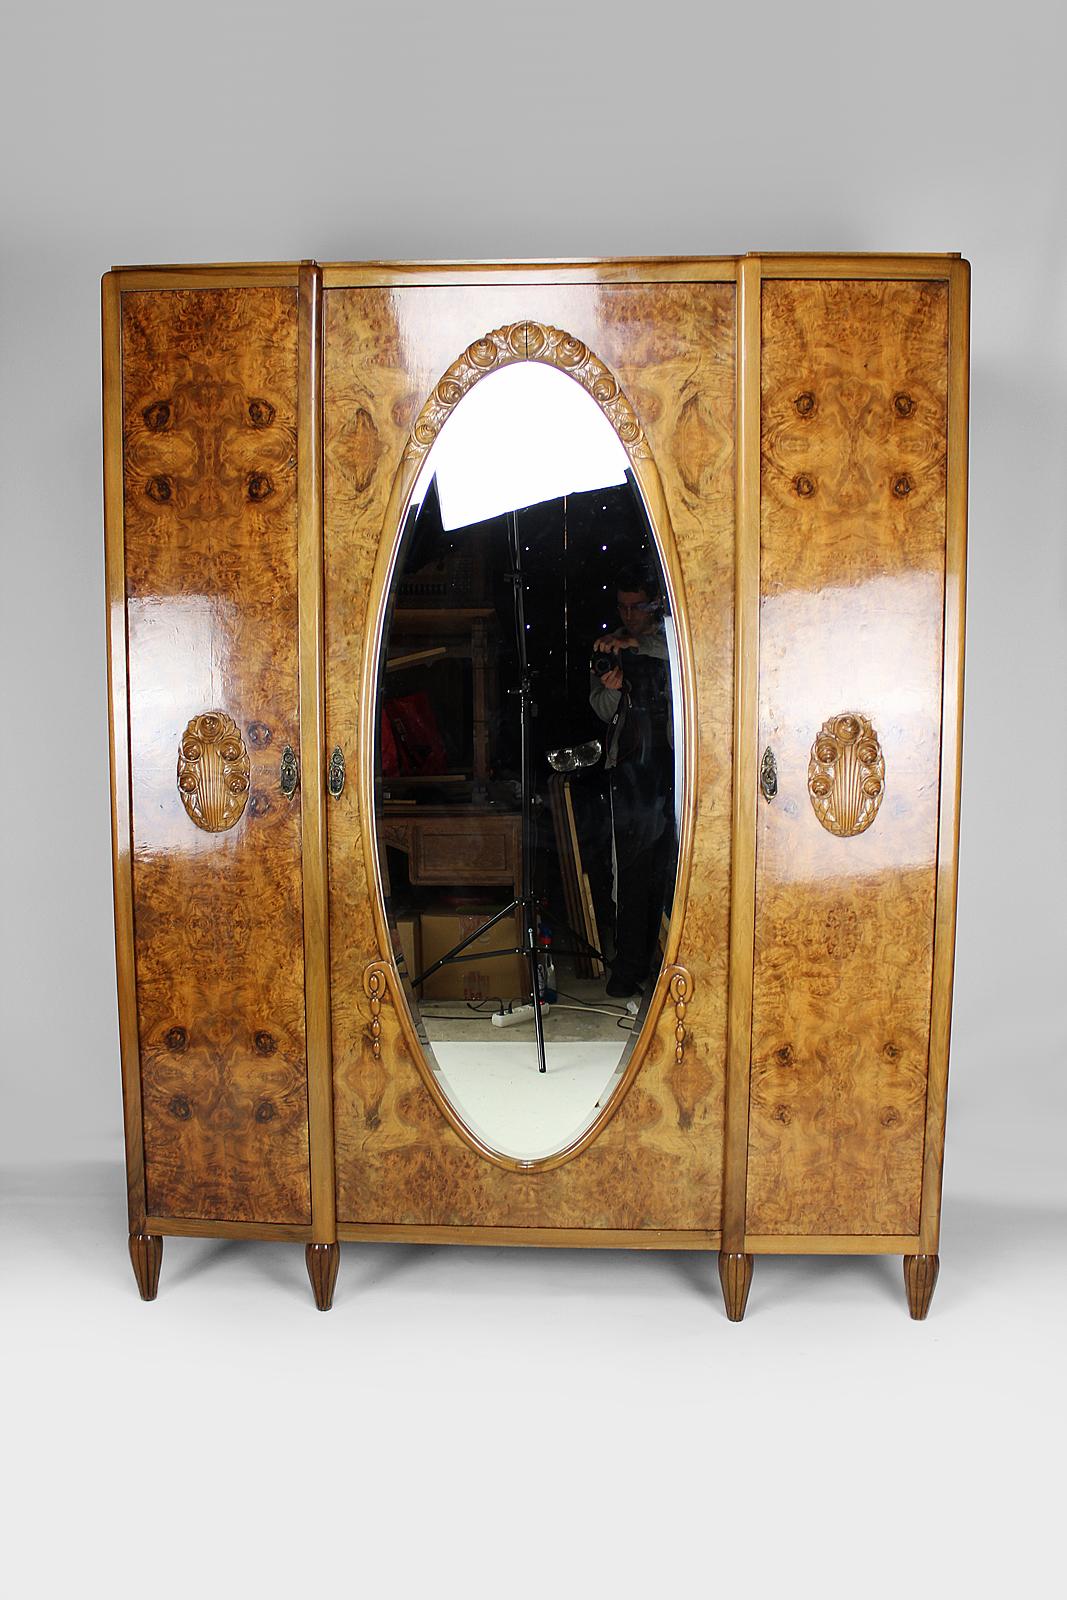 Superb Gauthier-Poinsignon wardrobe in burr walnut and walnut, composed of a large central door with a beveled oval mirror and 2 side doors.

Model with roses: we find them sculpted in a garland above the mirror, in bouquets on each side door, and